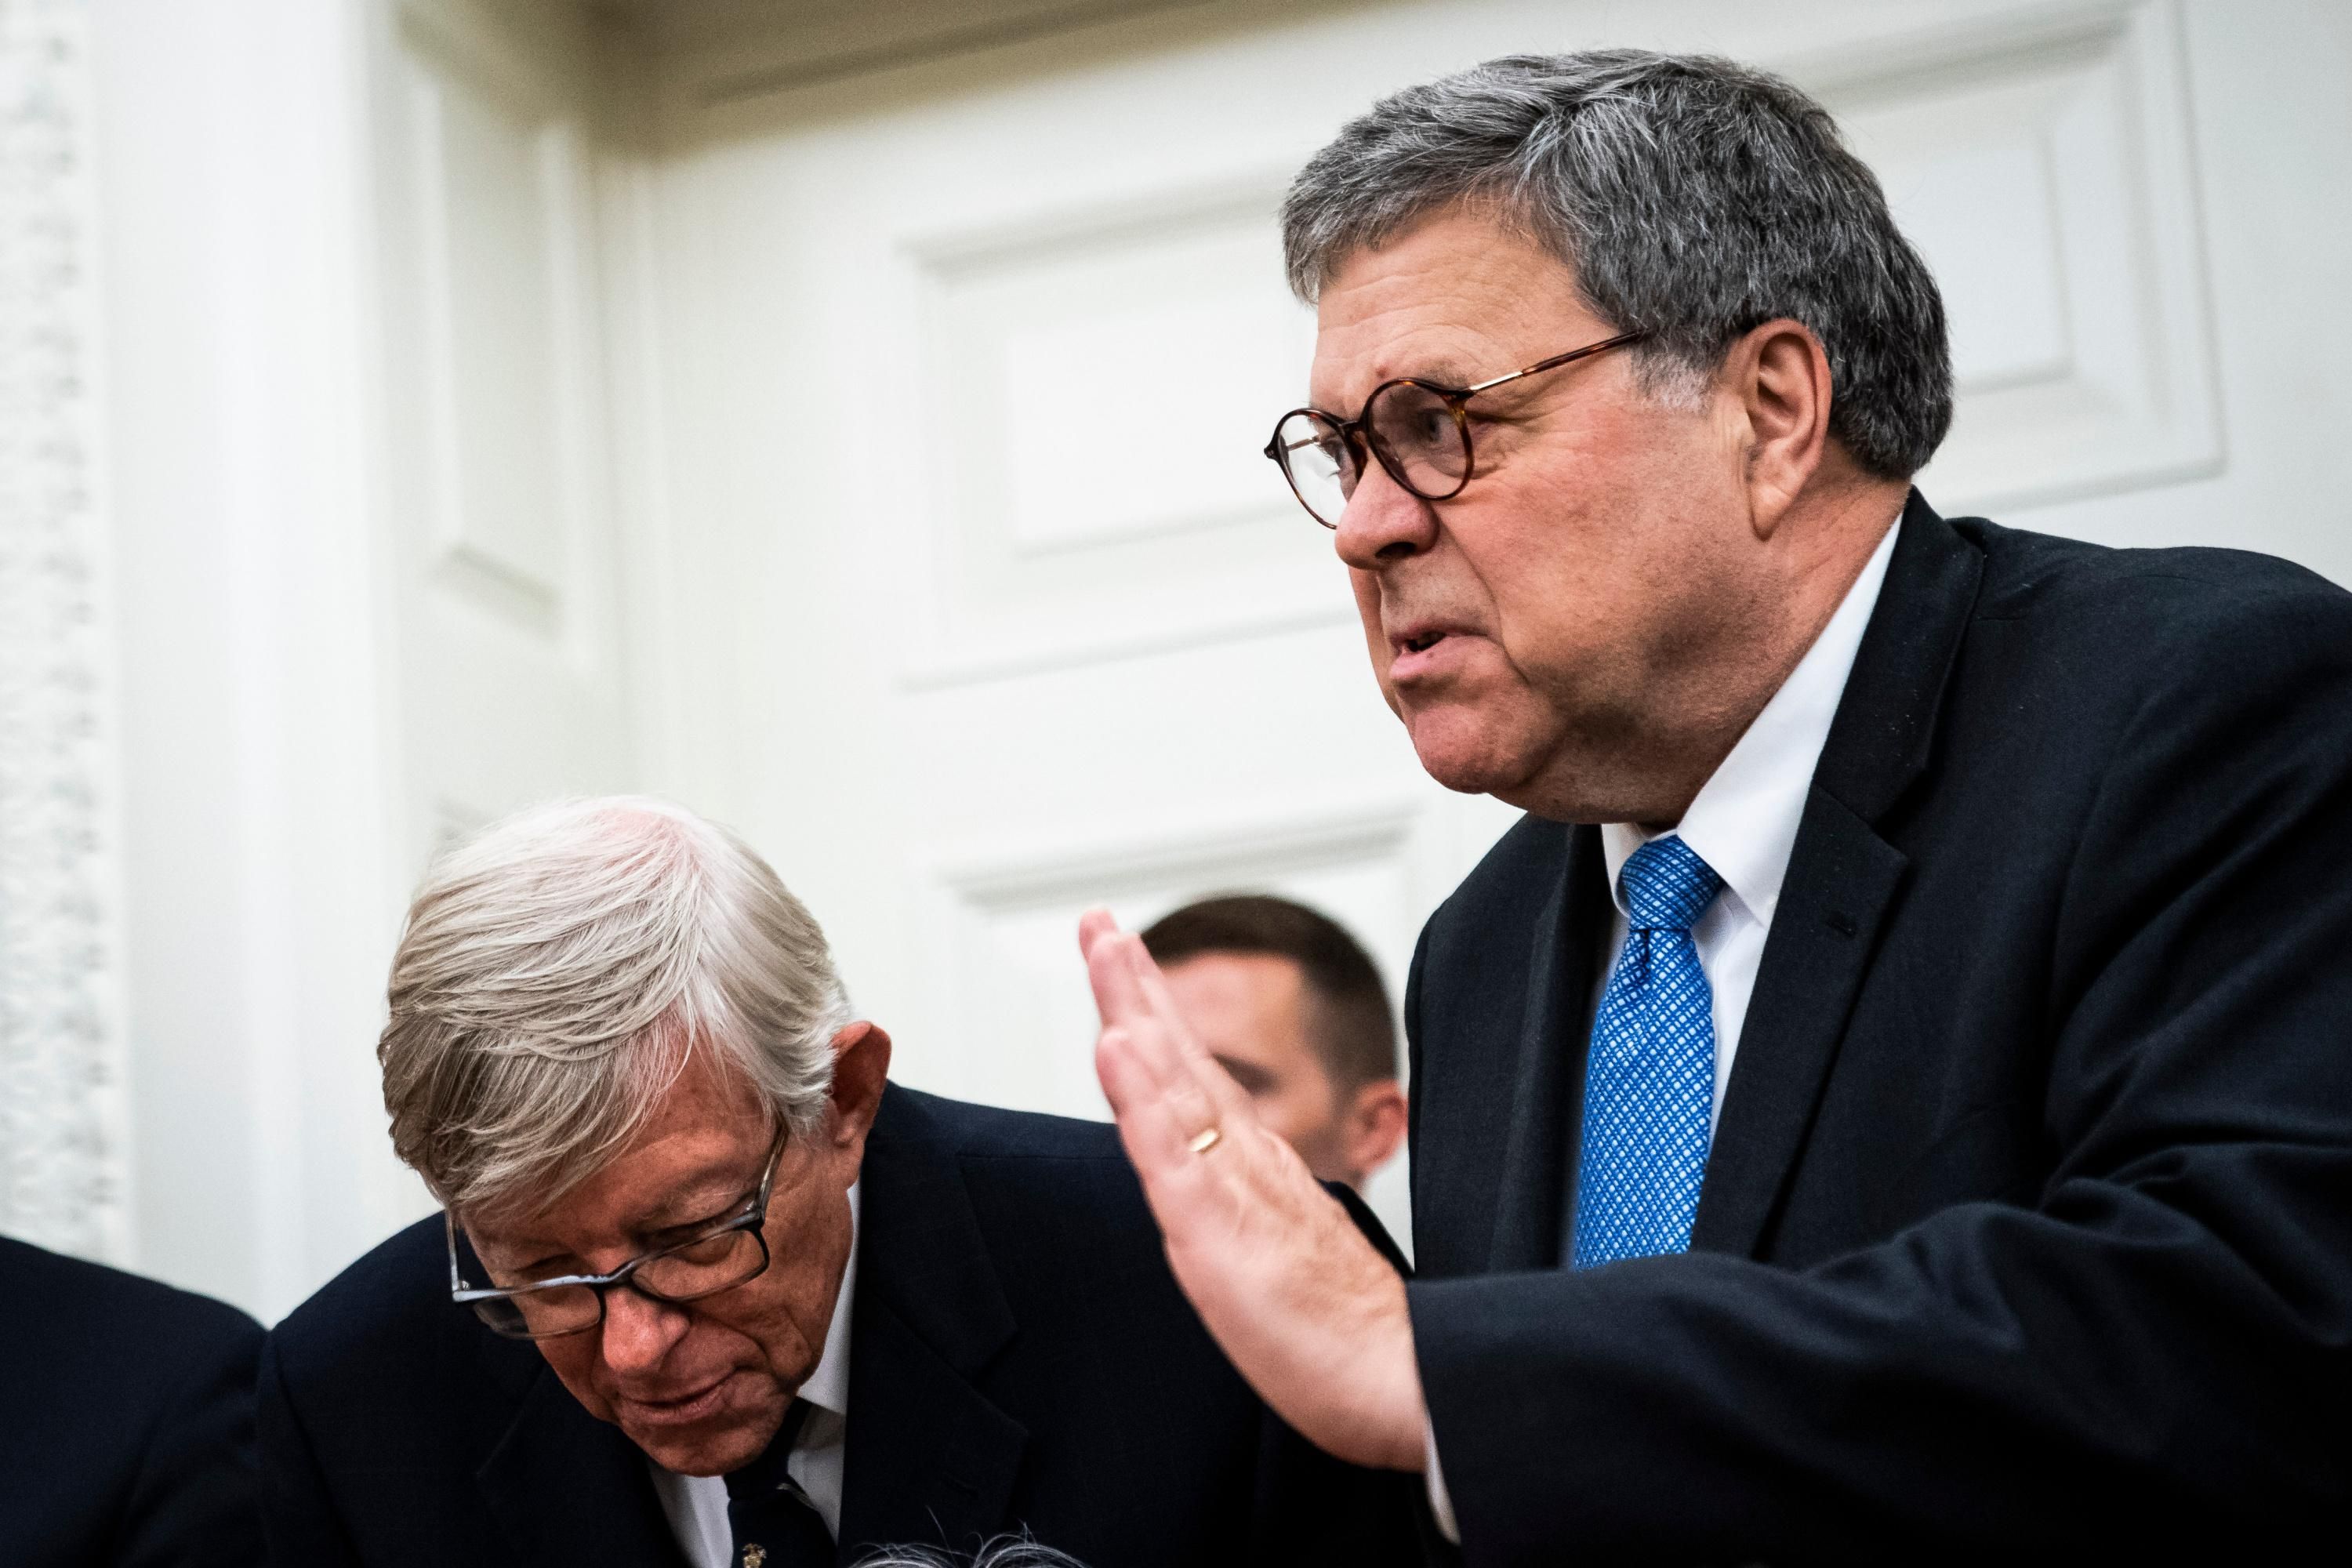 William Barr appears at a ceremony